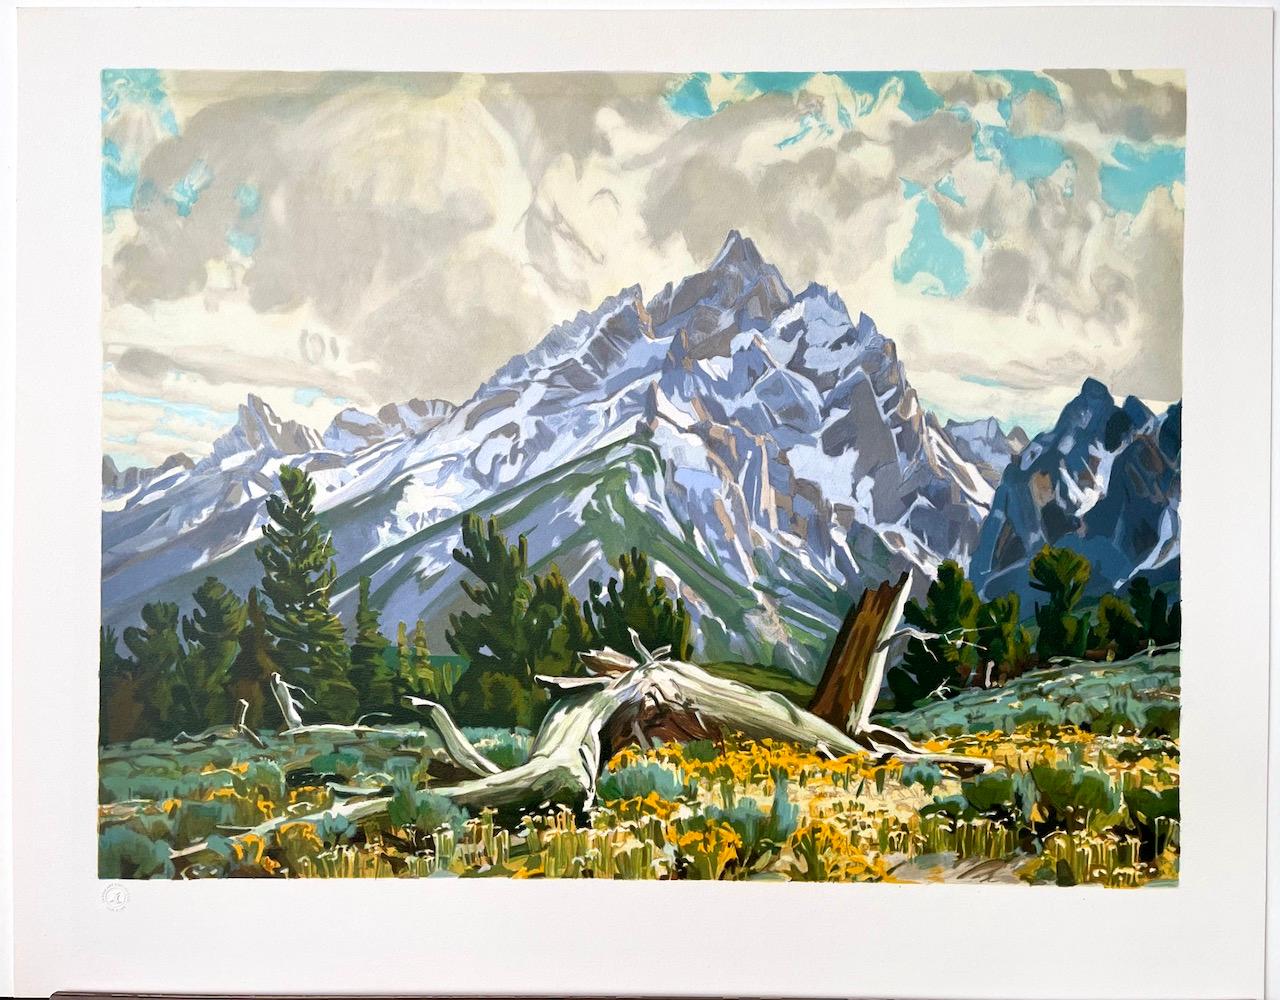 TAPESTRY OF SPRING by the American Western artist Conrad Schwiering, is a hand drawn limited edition lithograph printed using hand lithography techniques on archival Somerset paper 100% acid free. TAPESTRY OF SPRING is a realistic Western landscape